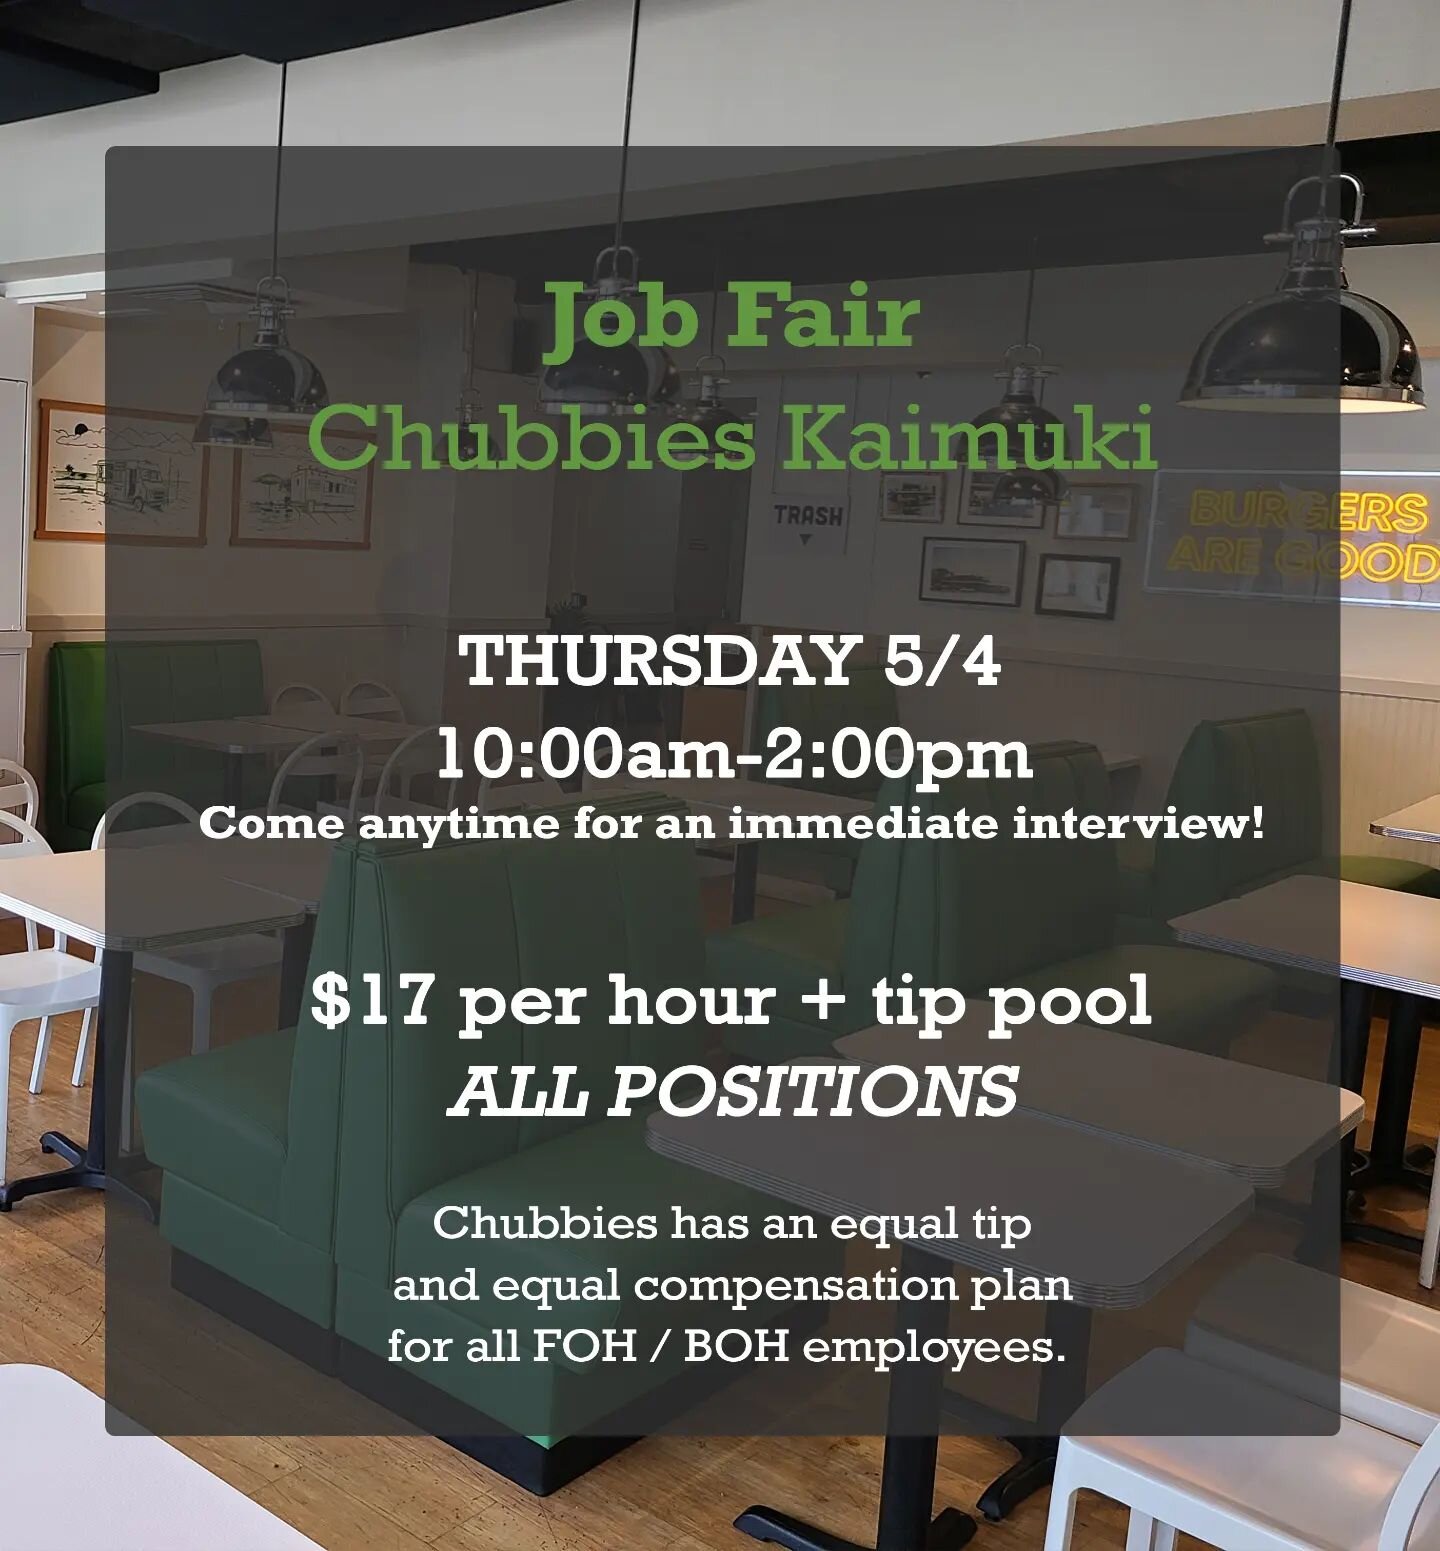 JOIN OUR TEAM🍔✨️

Details: 
- May 4th (Thursday)
- 10:00 AM - 2:00 PM 
- At Chubbies Kaimuki restaurant 
- Bring your resume or fill out an application when you get there 
- On site job interview 

Part time, full time with benefits, or seasonal (su